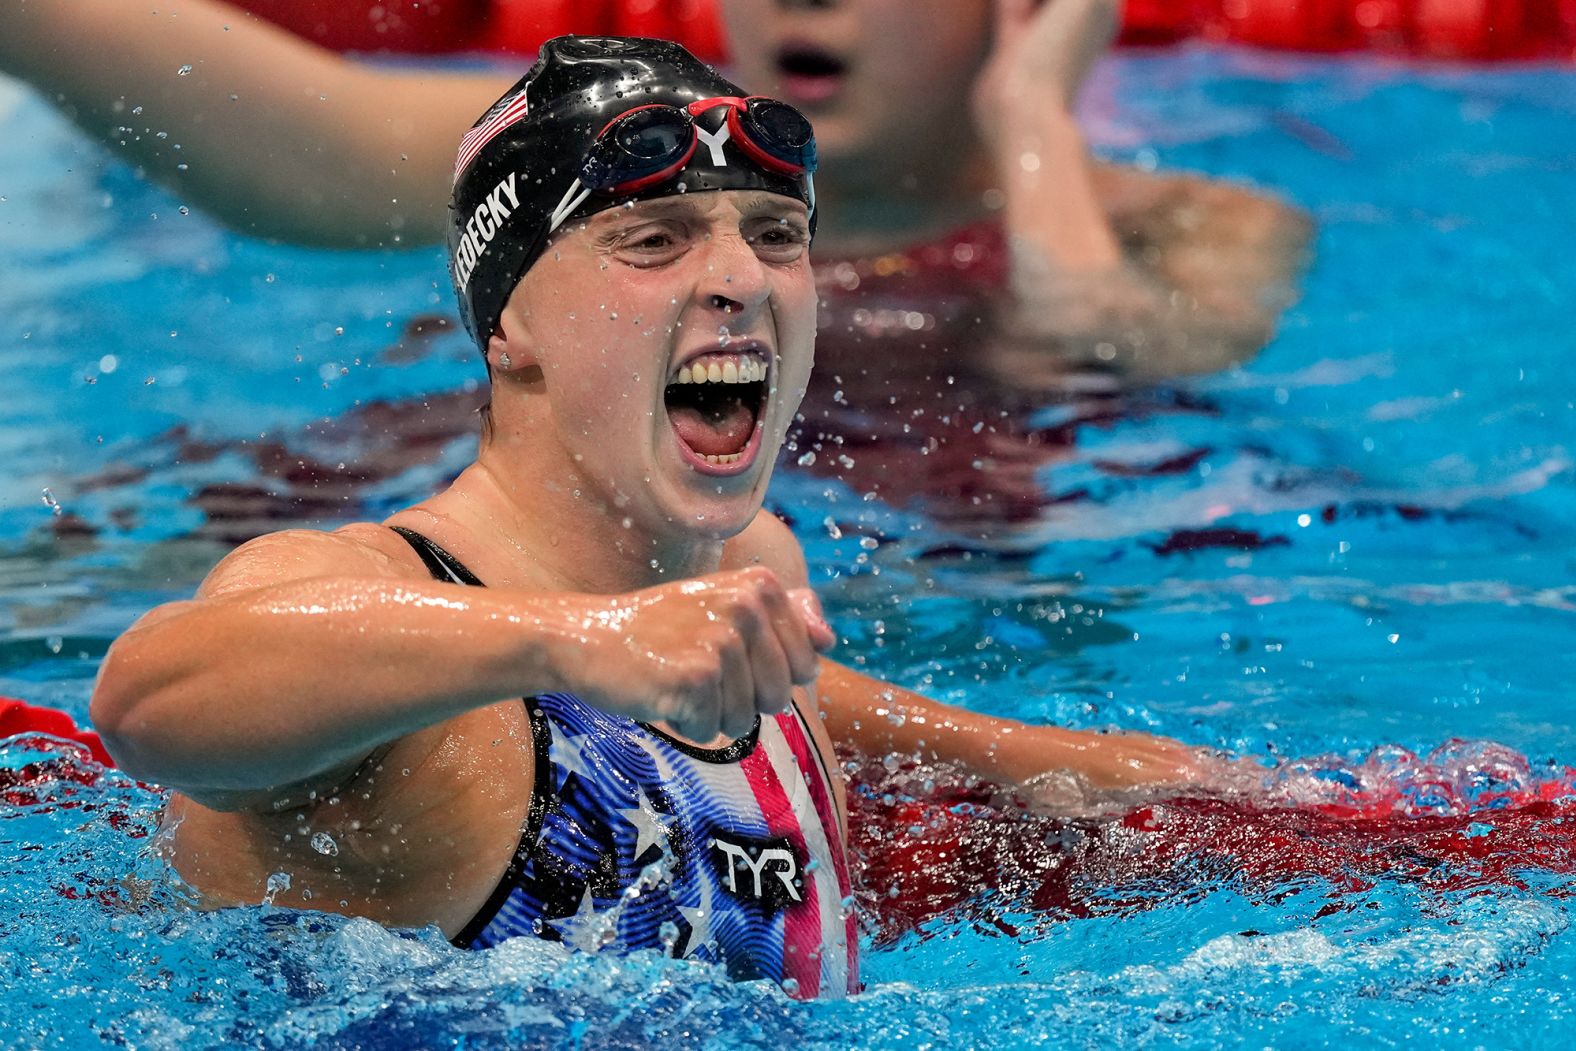 US swimmer Katie Ledecky celebrates after <a href="index.php?page=&url=https%3A%2F%2Fwww.cnn.com%2Fworld%2Flive-news%2Ftokyo-2020-olympics-07-27-21-spt%2Fh_86106ef469b0352fbf88fceea5aa405a" target="_blank">crushing the field in the 1,500-meter freestyle</a> on Wednesday, July 28. It was her sixth career gold medal and her eighth Olympic medal in all.